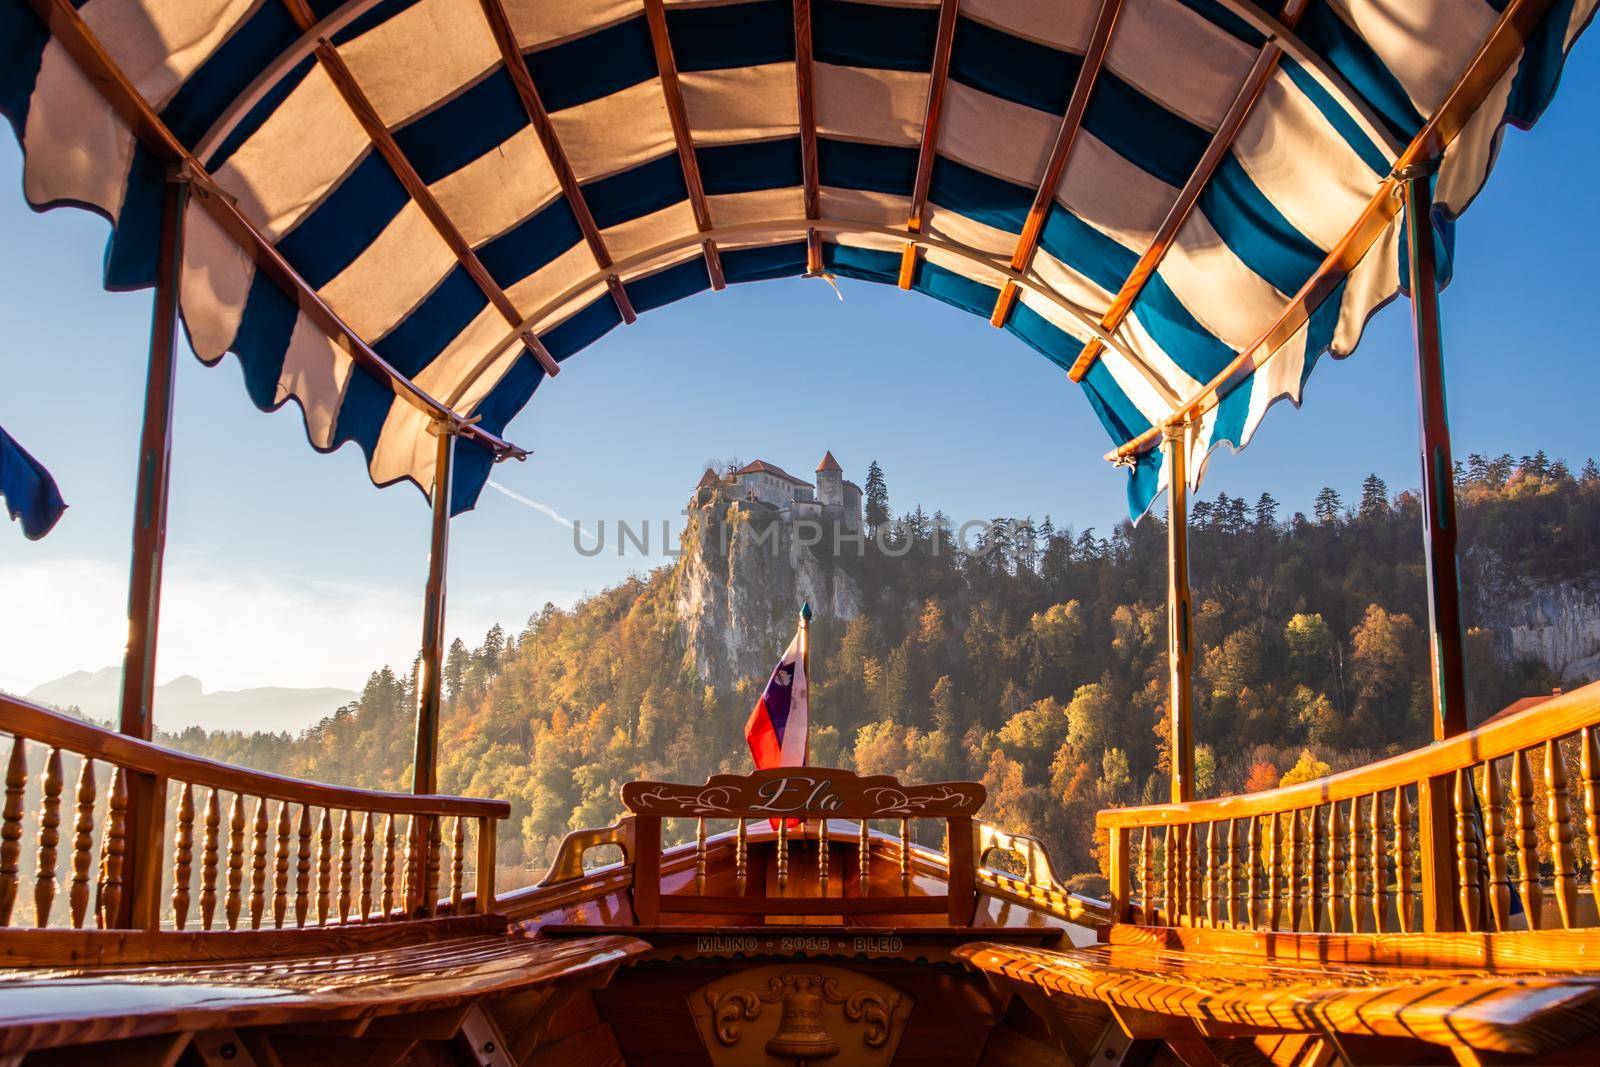 Interior of traditional pletna boat on lake Bled with old castle on the cliff, Bled, Slovenia.